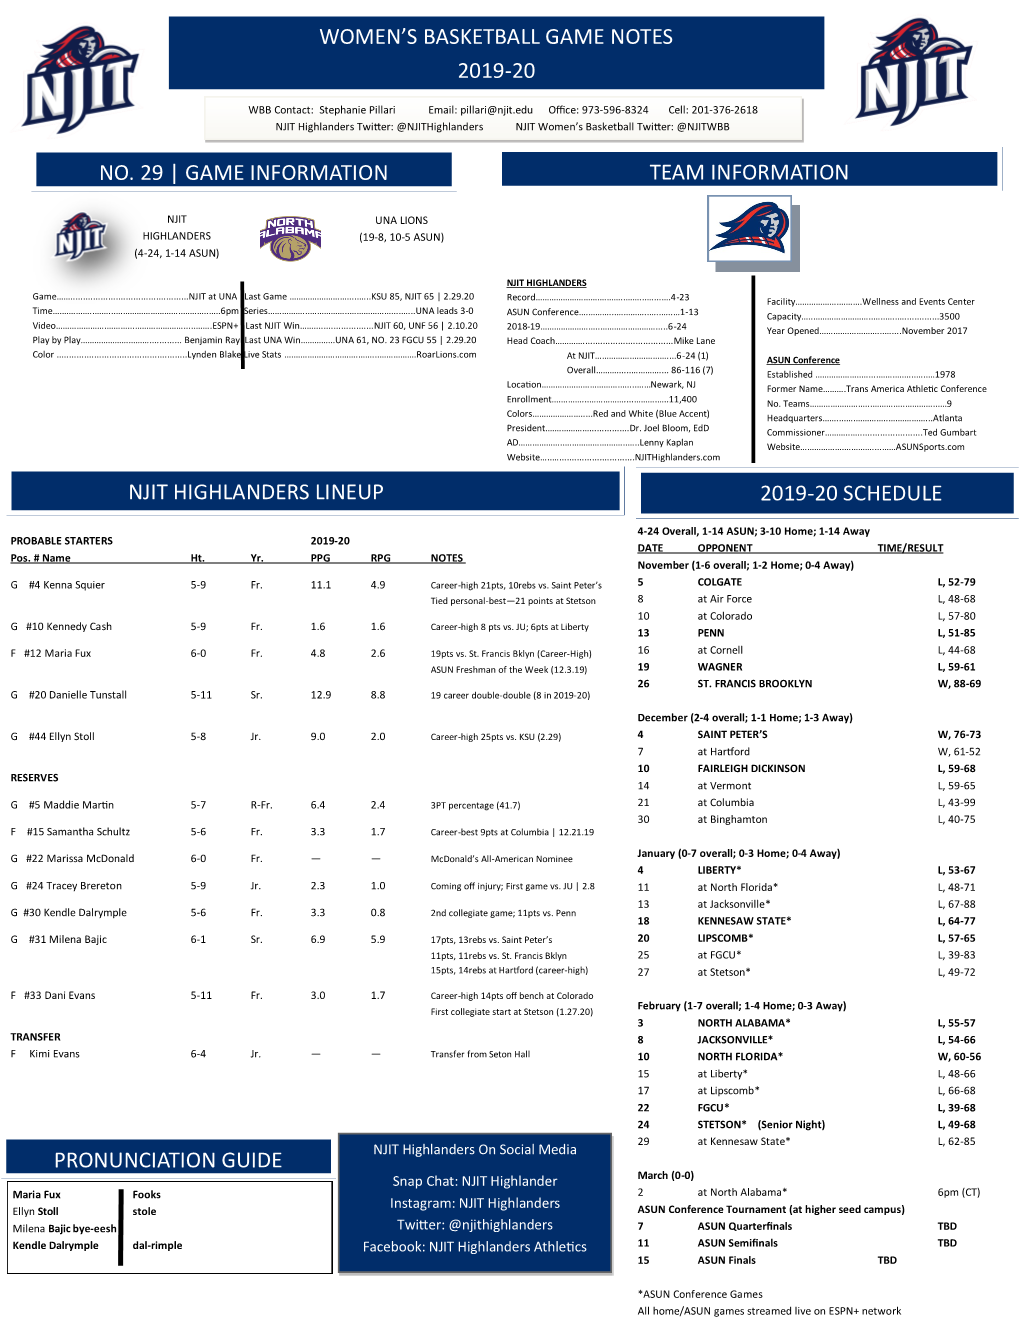 Women's Basketball Game Notes 2019-20 Team Information Njit Highlanders Lineup Pronunciation Guide 2019-20 Schedule No. 29